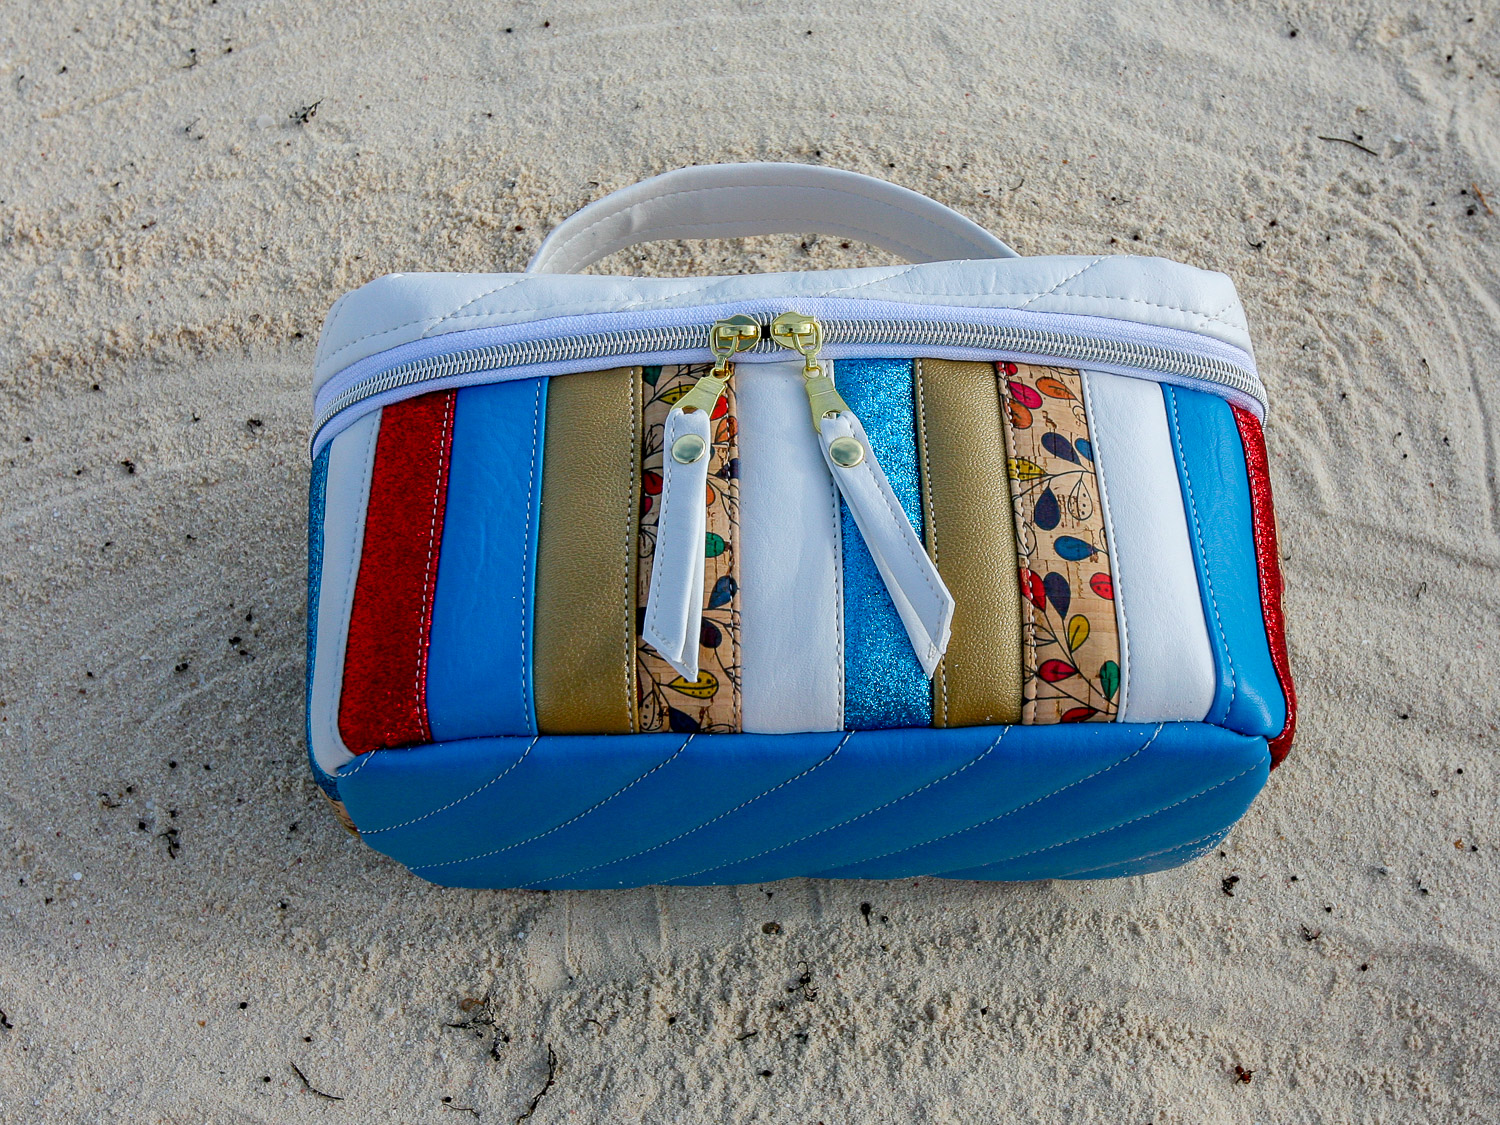 DIY DOUBLE ZIP GEAR BAG  Travel Pouch Toiletry bag Sewing